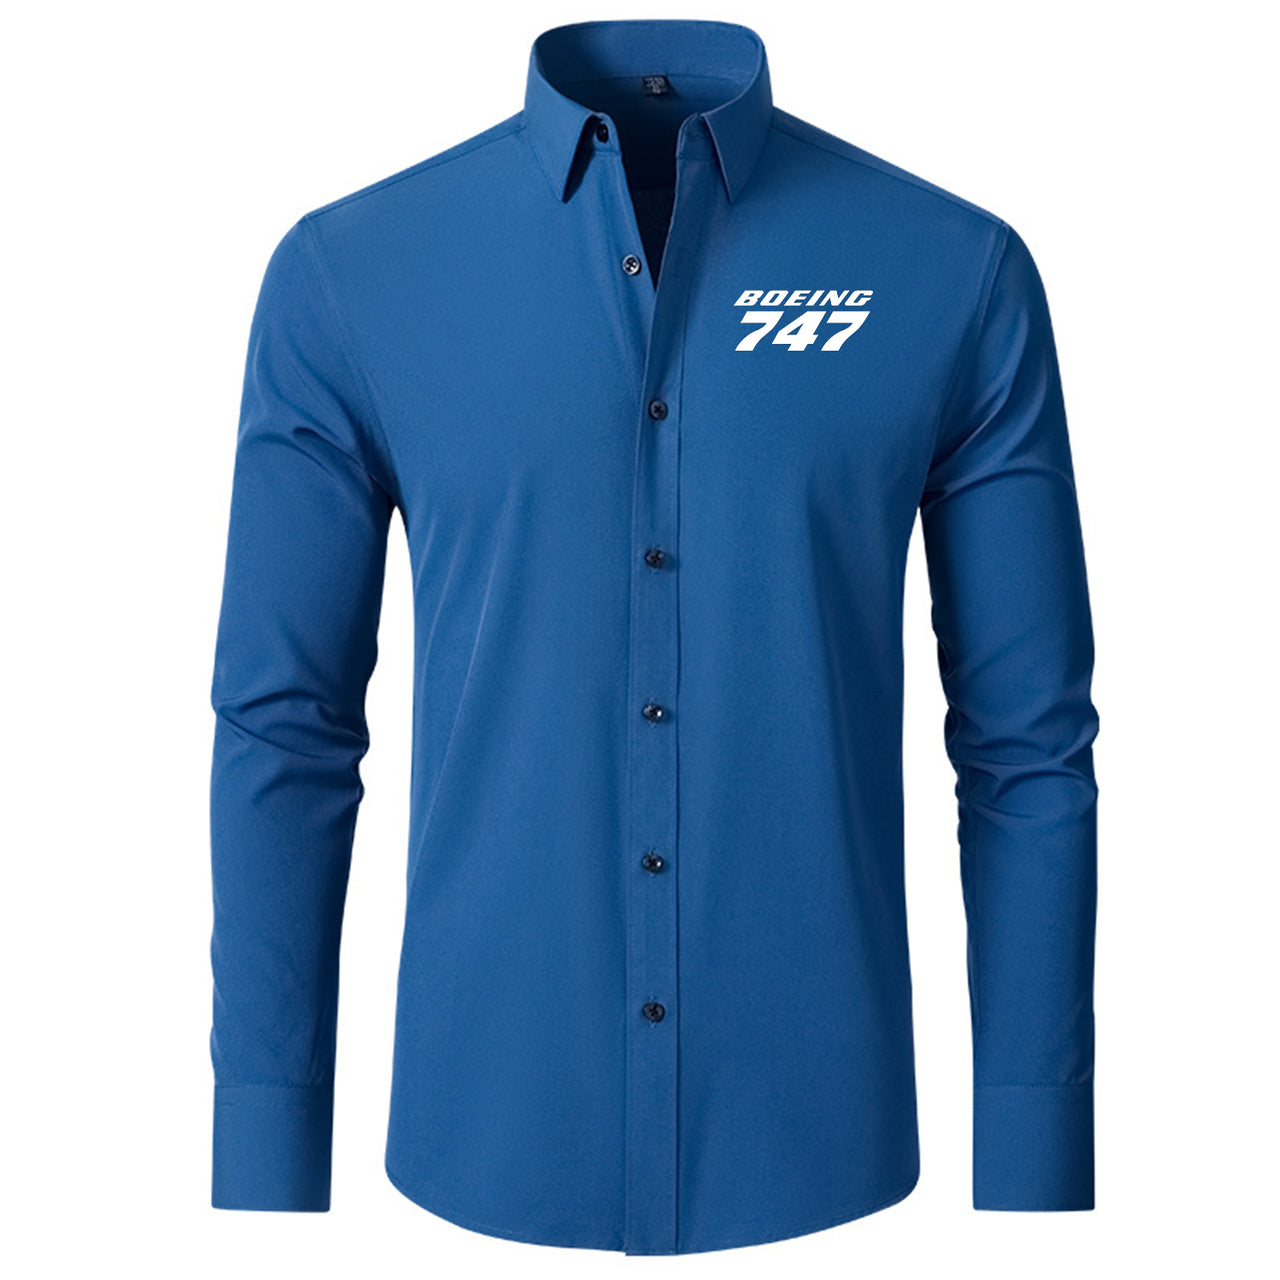 Boeing 747 & Text Designed Long Sleeve Shirts